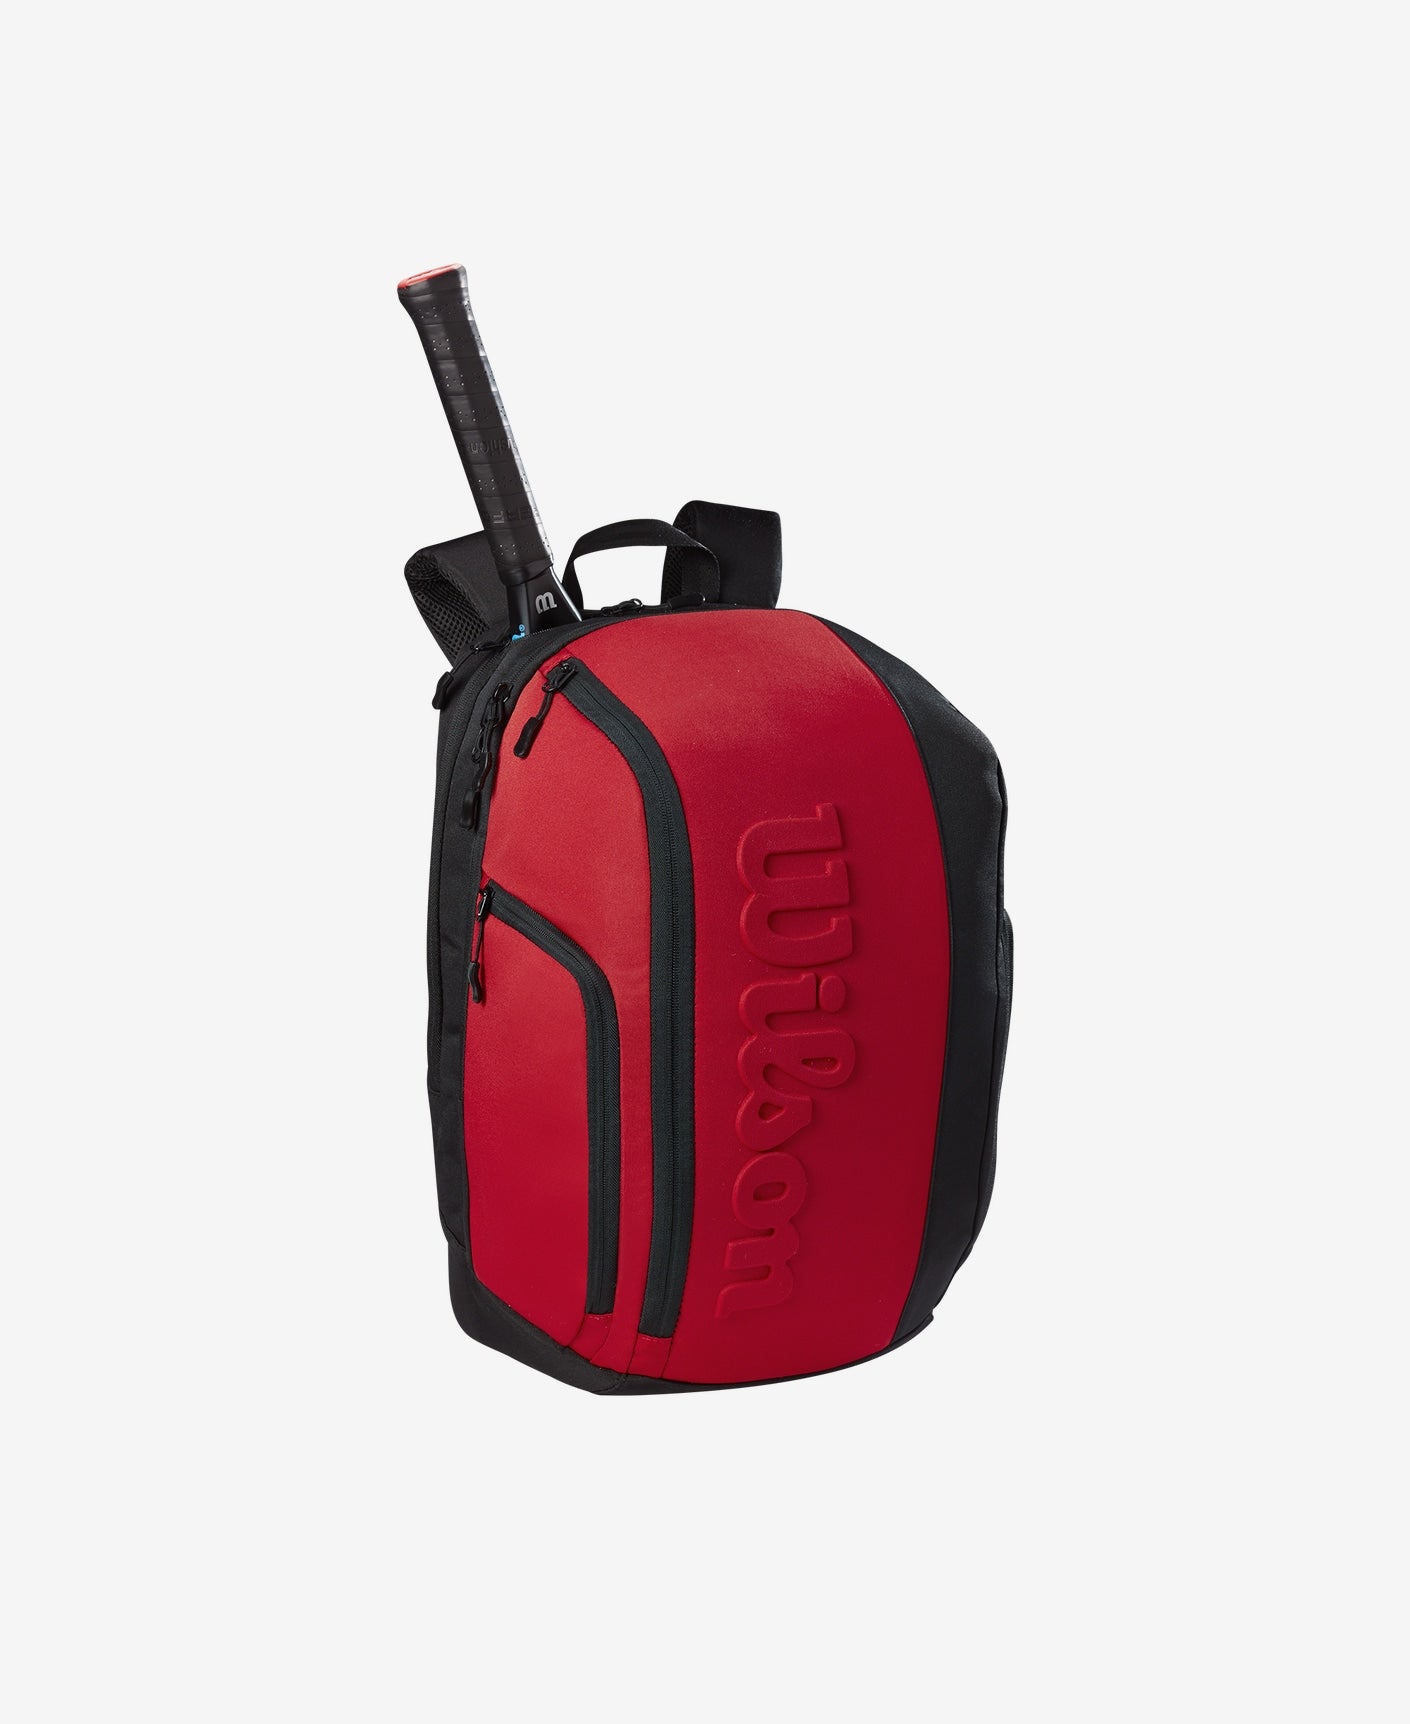 Rich Red Wilson Clash V2 Super Tour Tennis Backpack with Embossed Wilson Logo